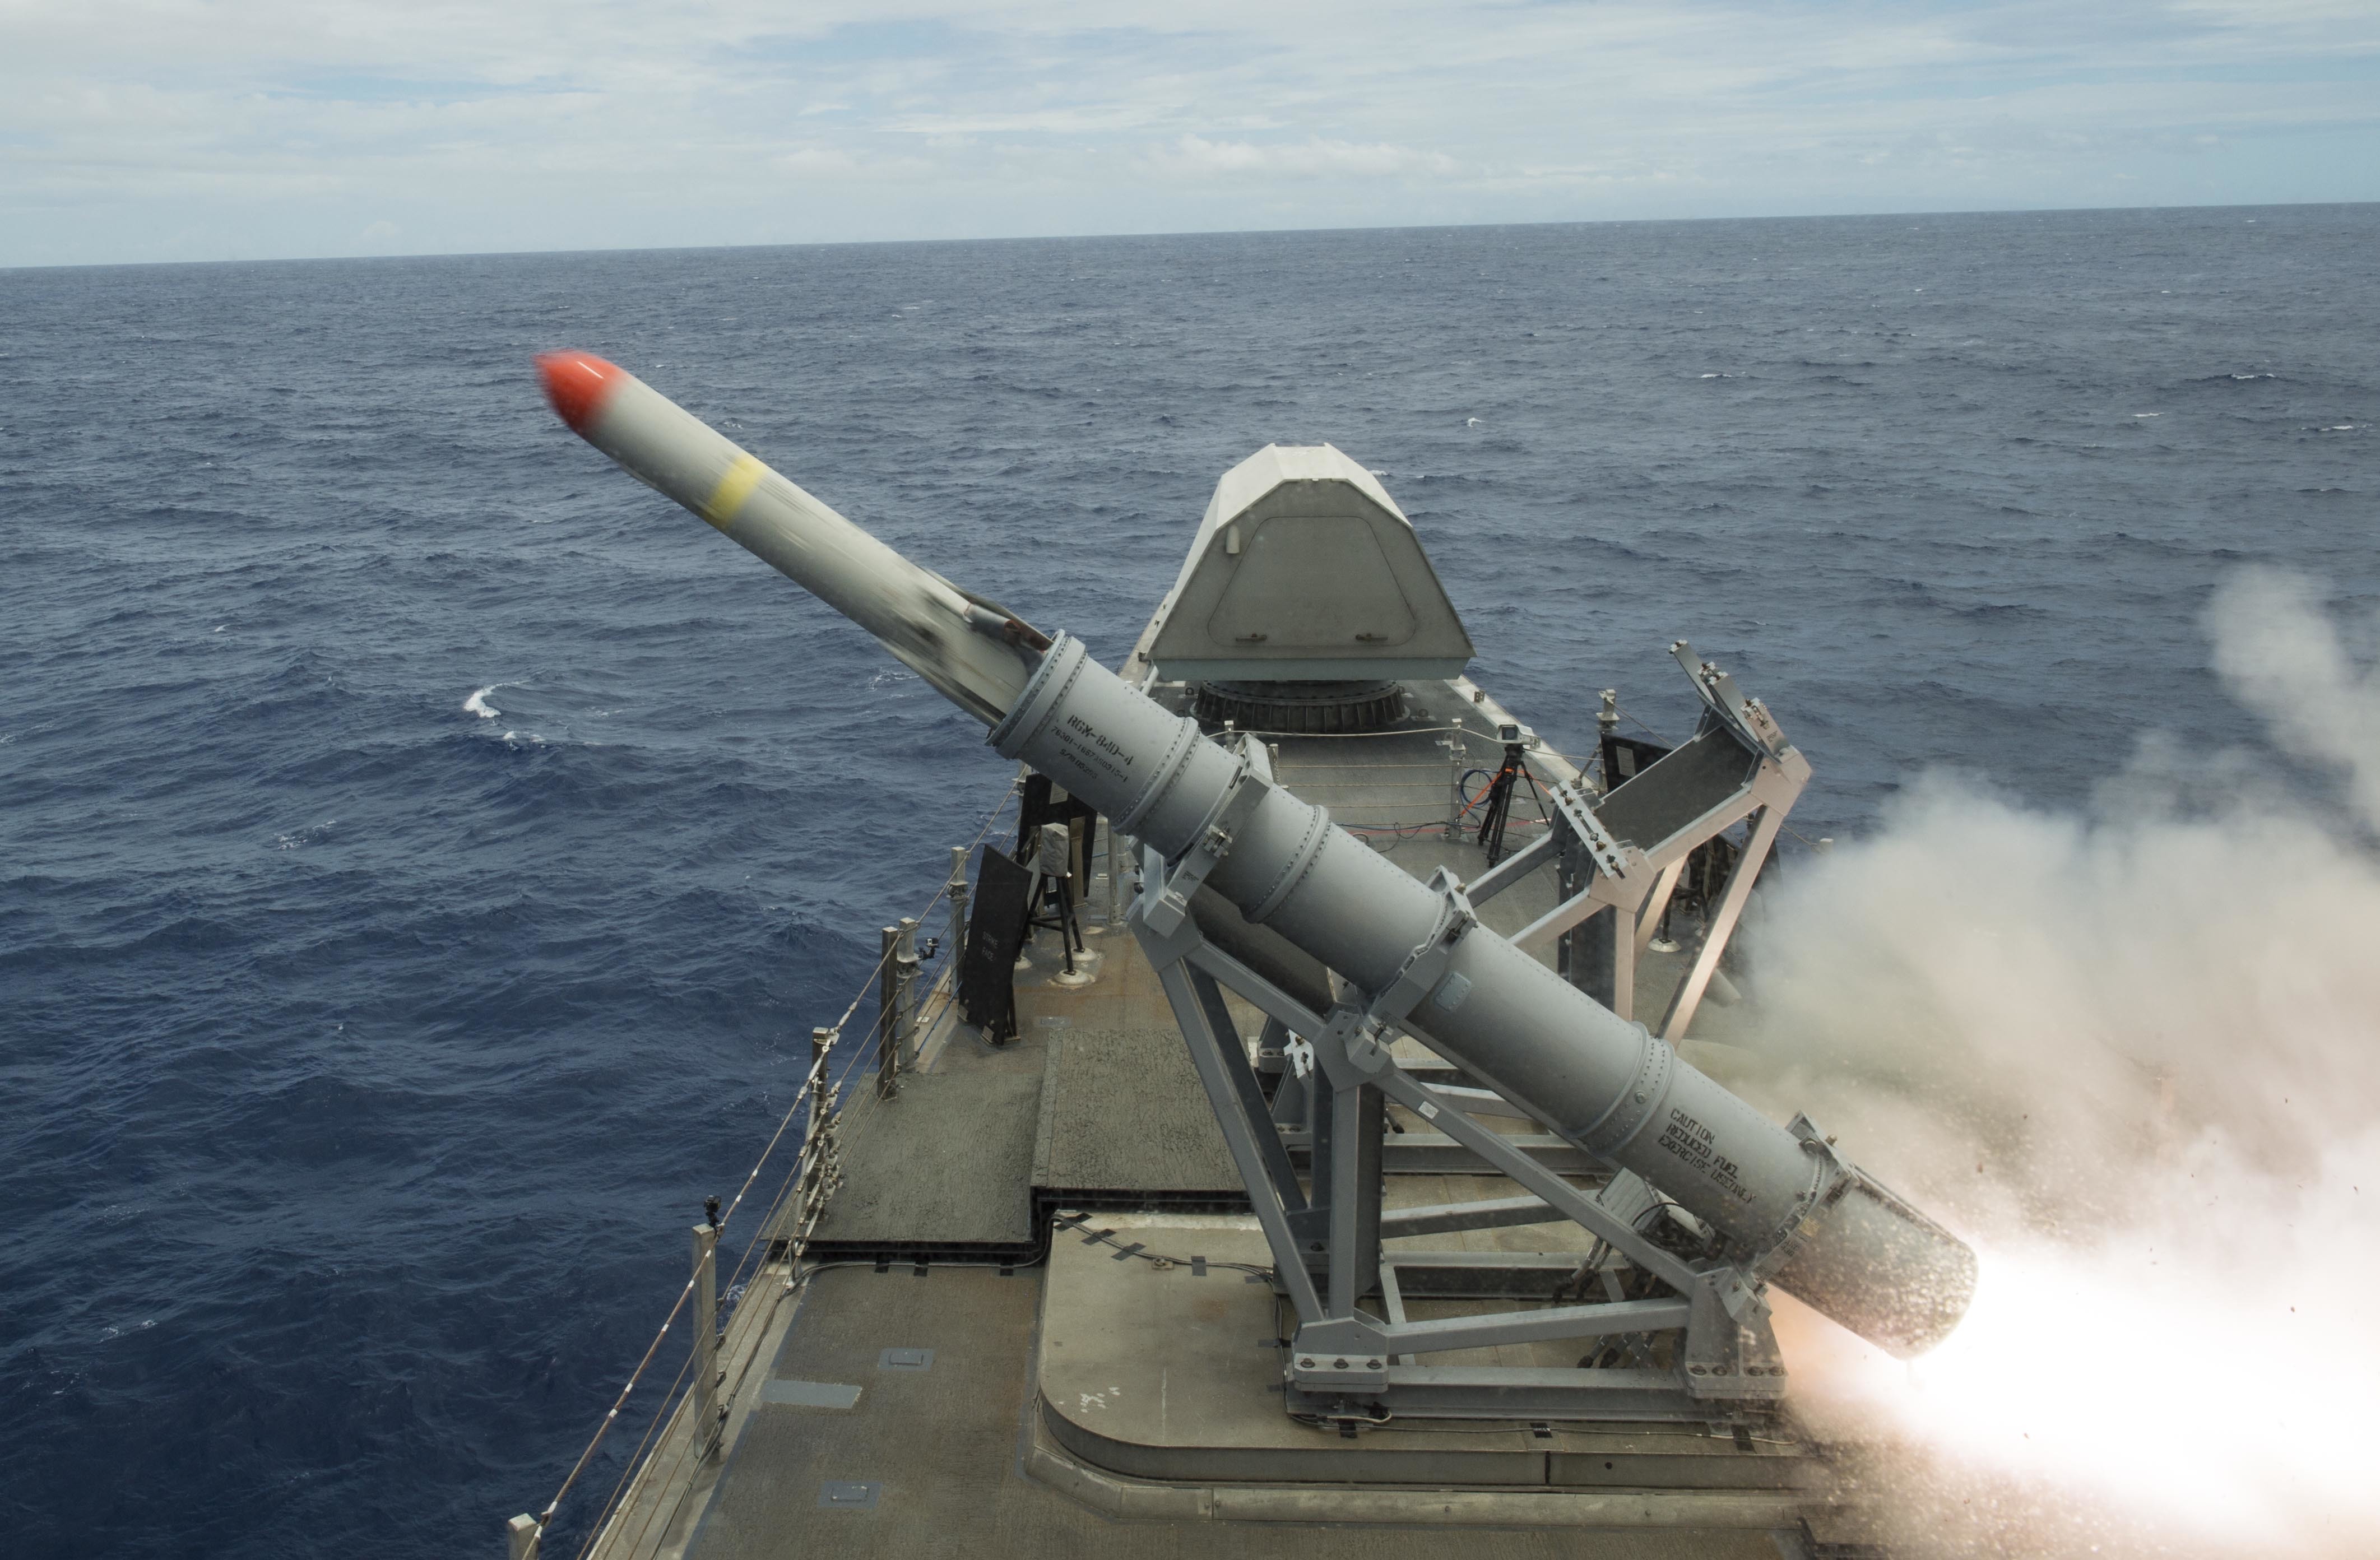 USS Coronado (LCS 4), an Independence-variant littoral combat ship, launches the first over-the-horizon missile engagement using a Harpoon Block 1C missile. US Navy photo.